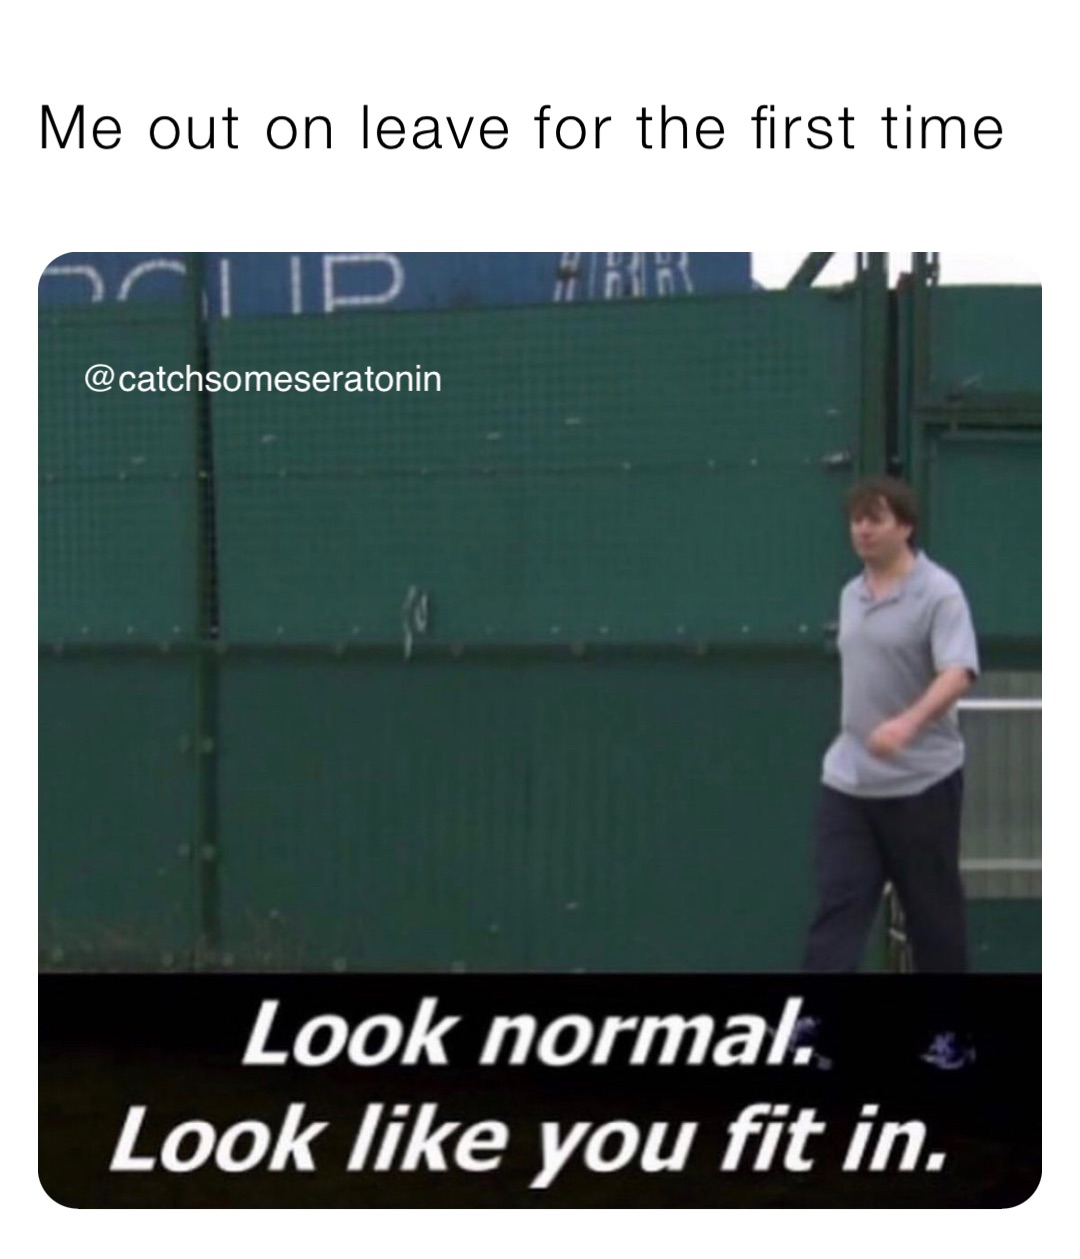 Me out on leave for the first time